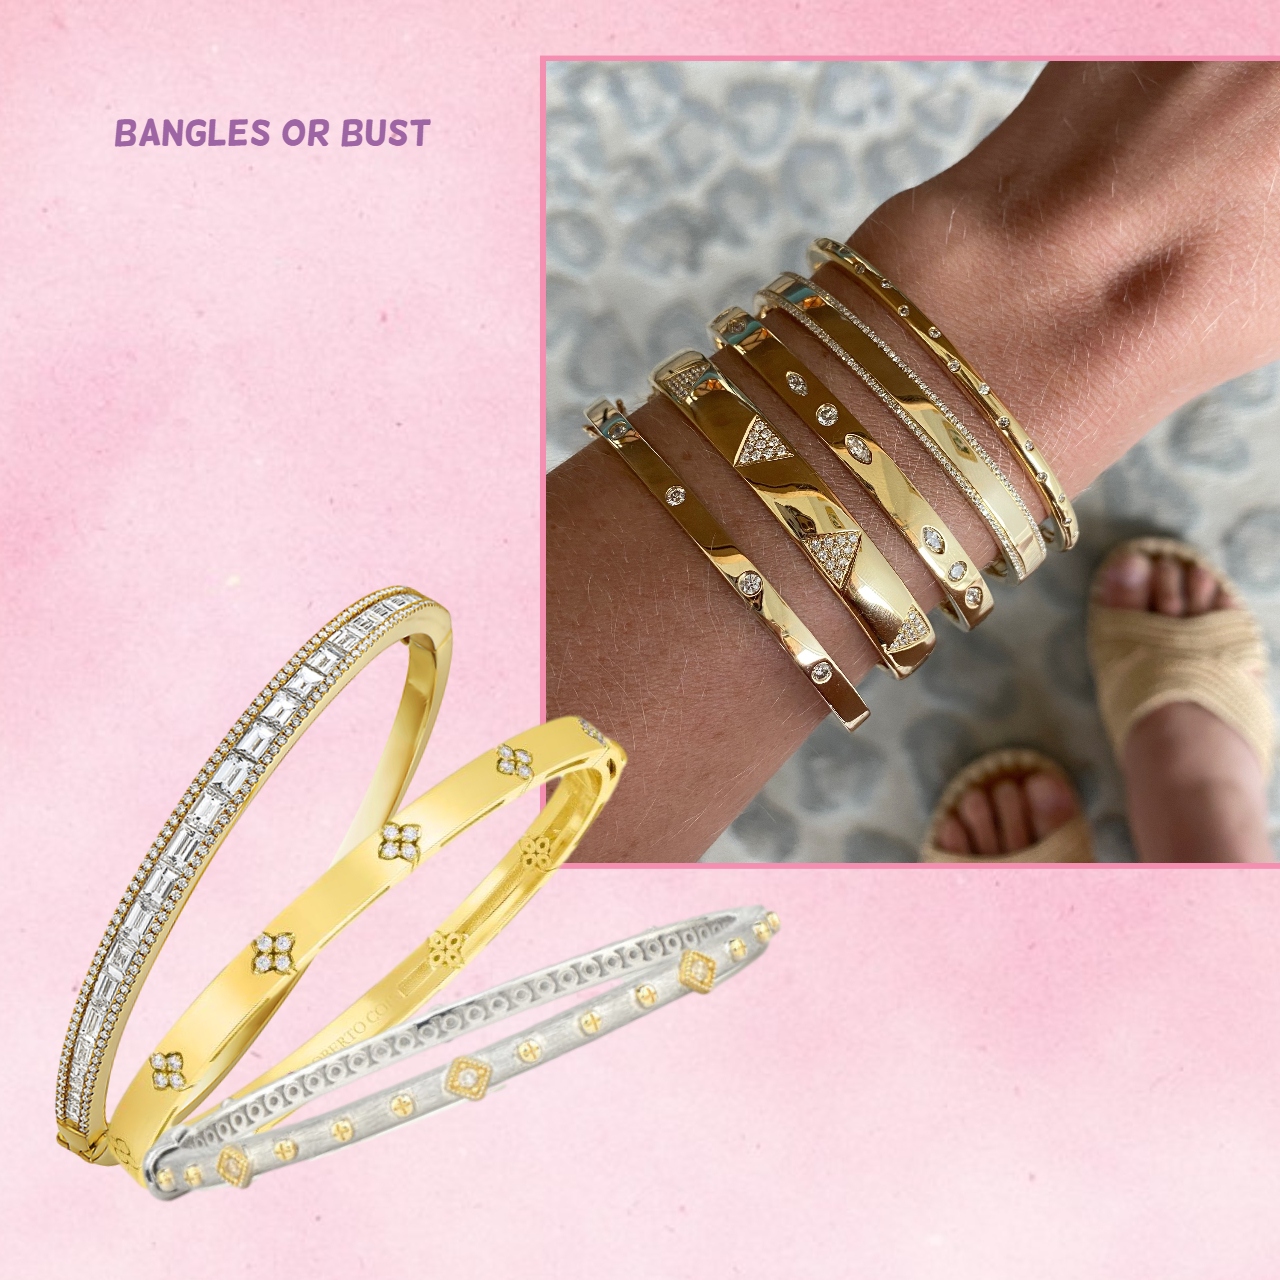 Bangles or bust